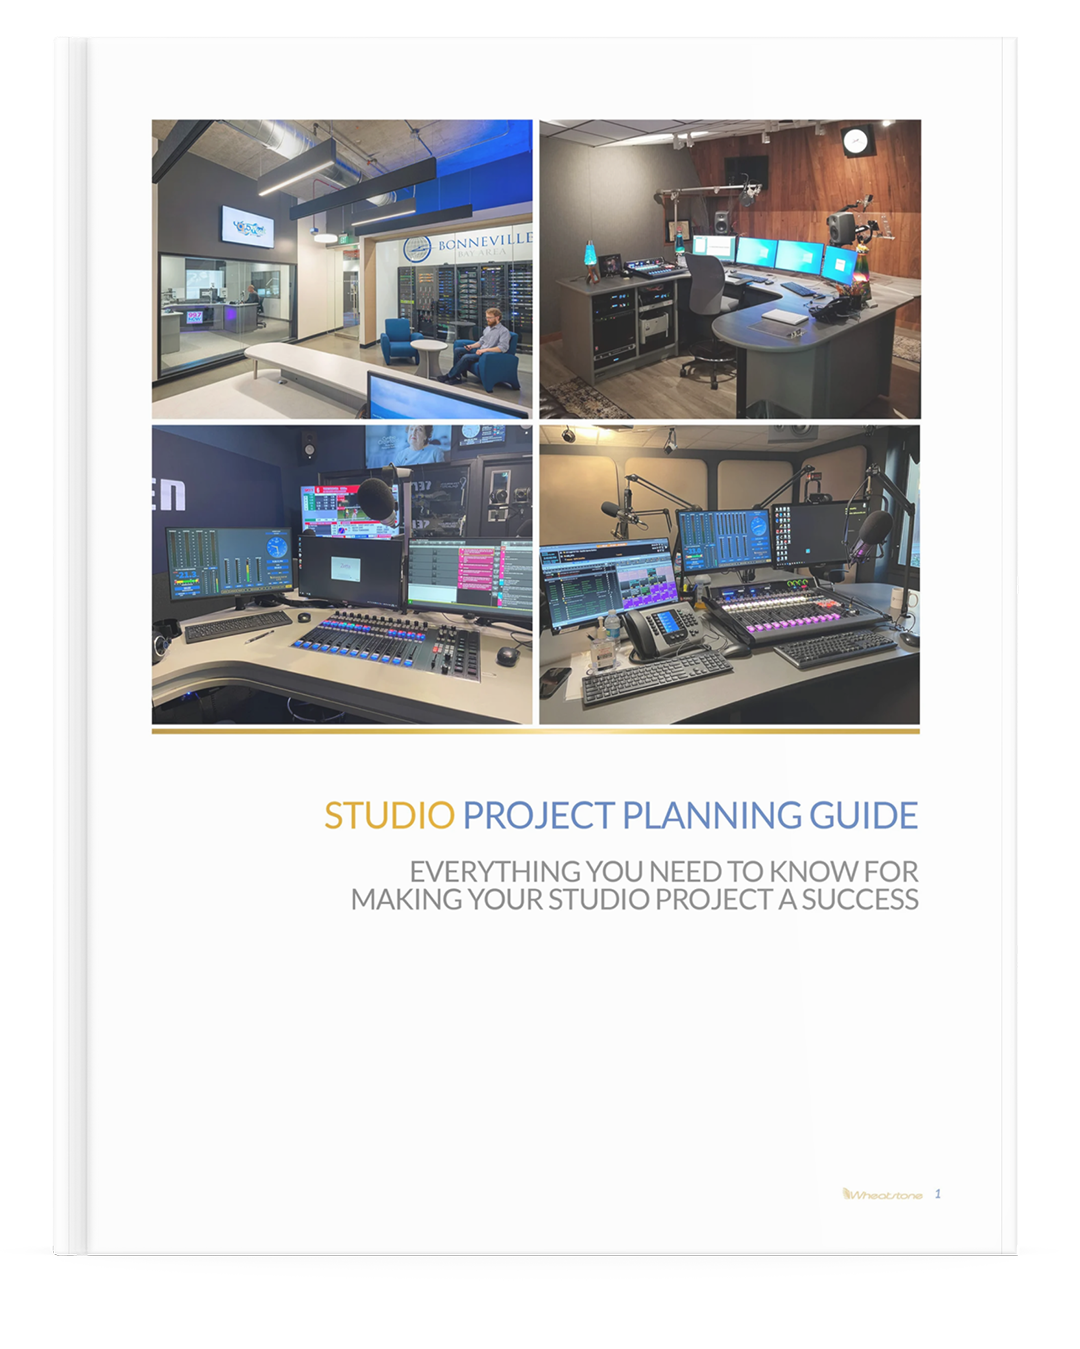 STUDIO PROJECT PLANNING GUIDE